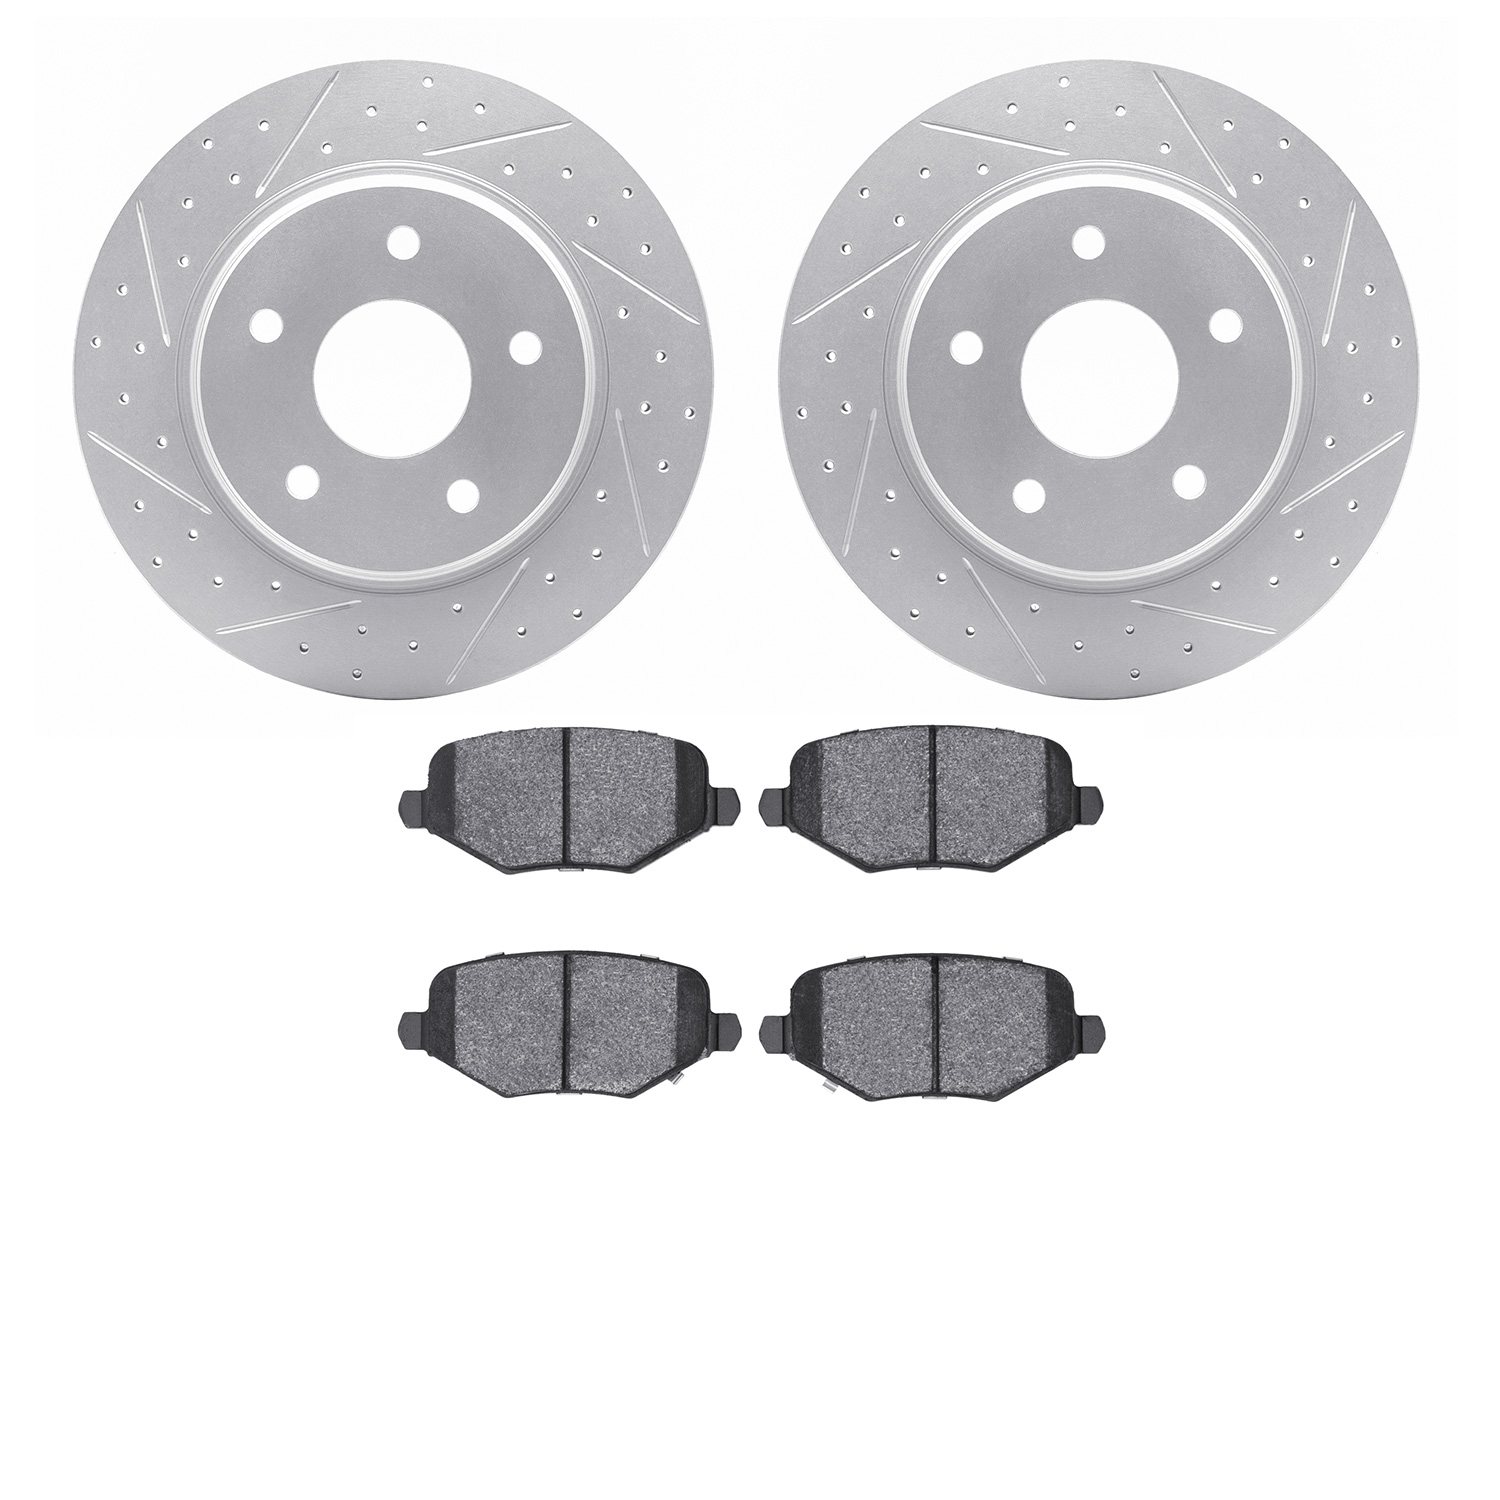 2502-40097 Geoperformance Drilled/Slotted Rotors w/5000 Advanced Brake Pads Kit, 2009-2016 Multiple Makes/Models, Position: Rear